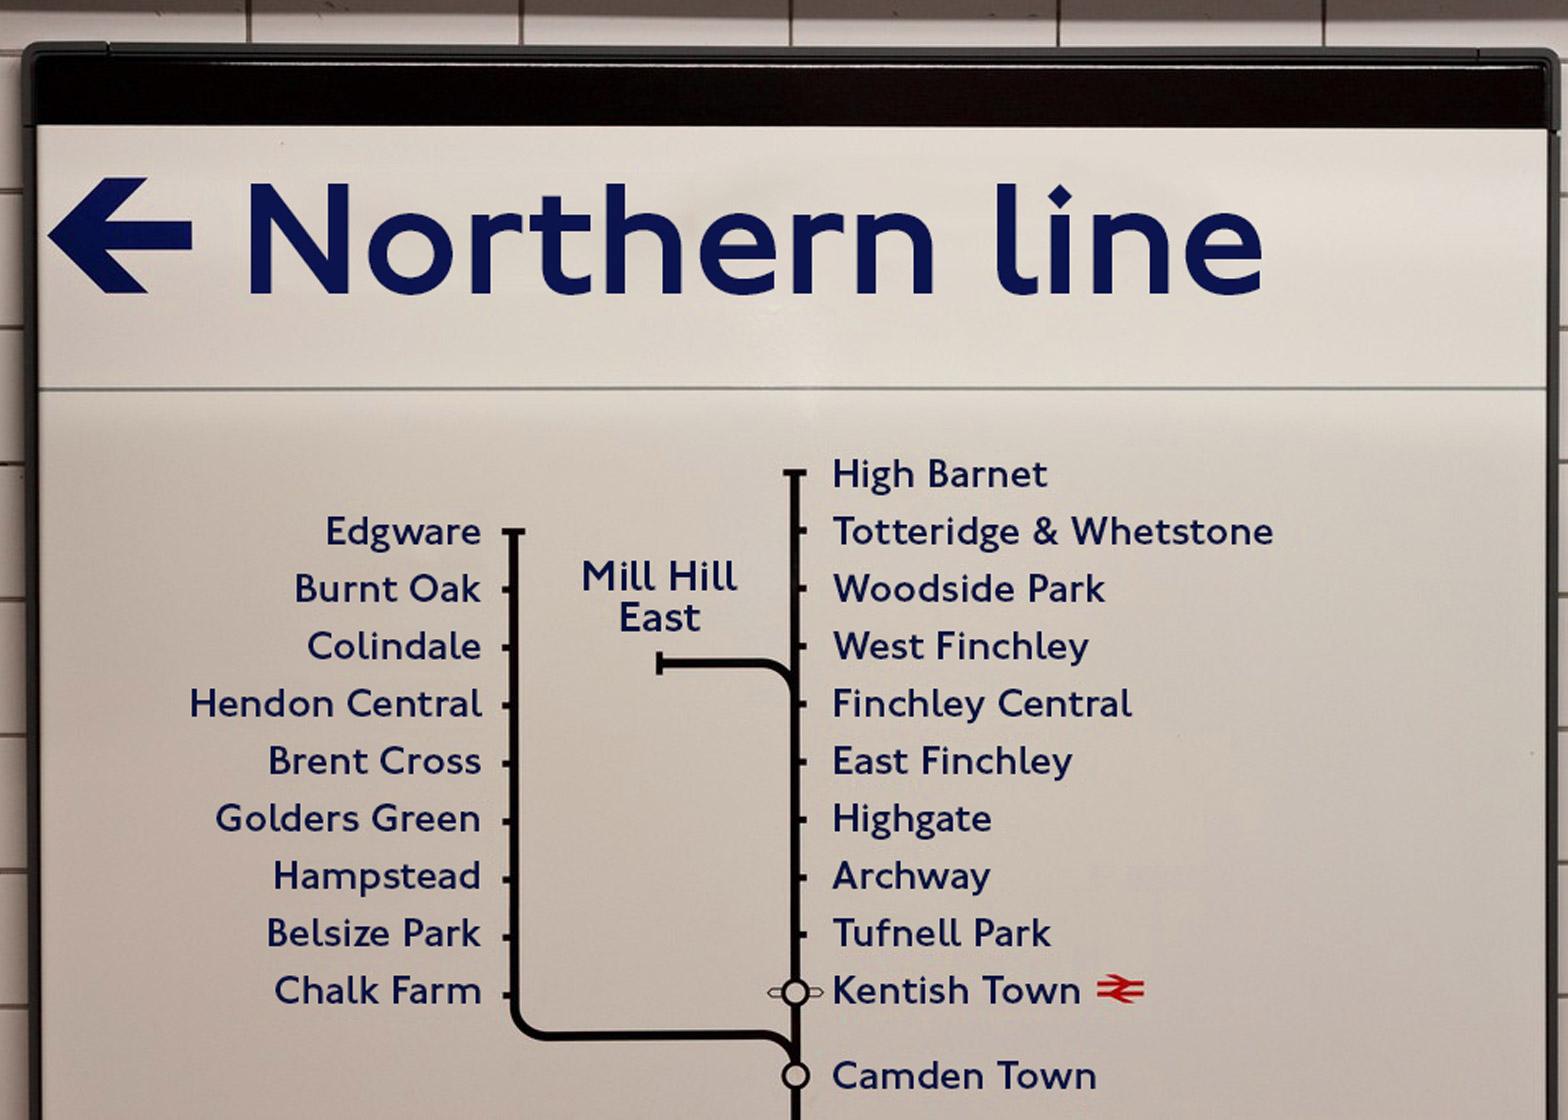 An example of the font on the list of stations on the Northern Line.